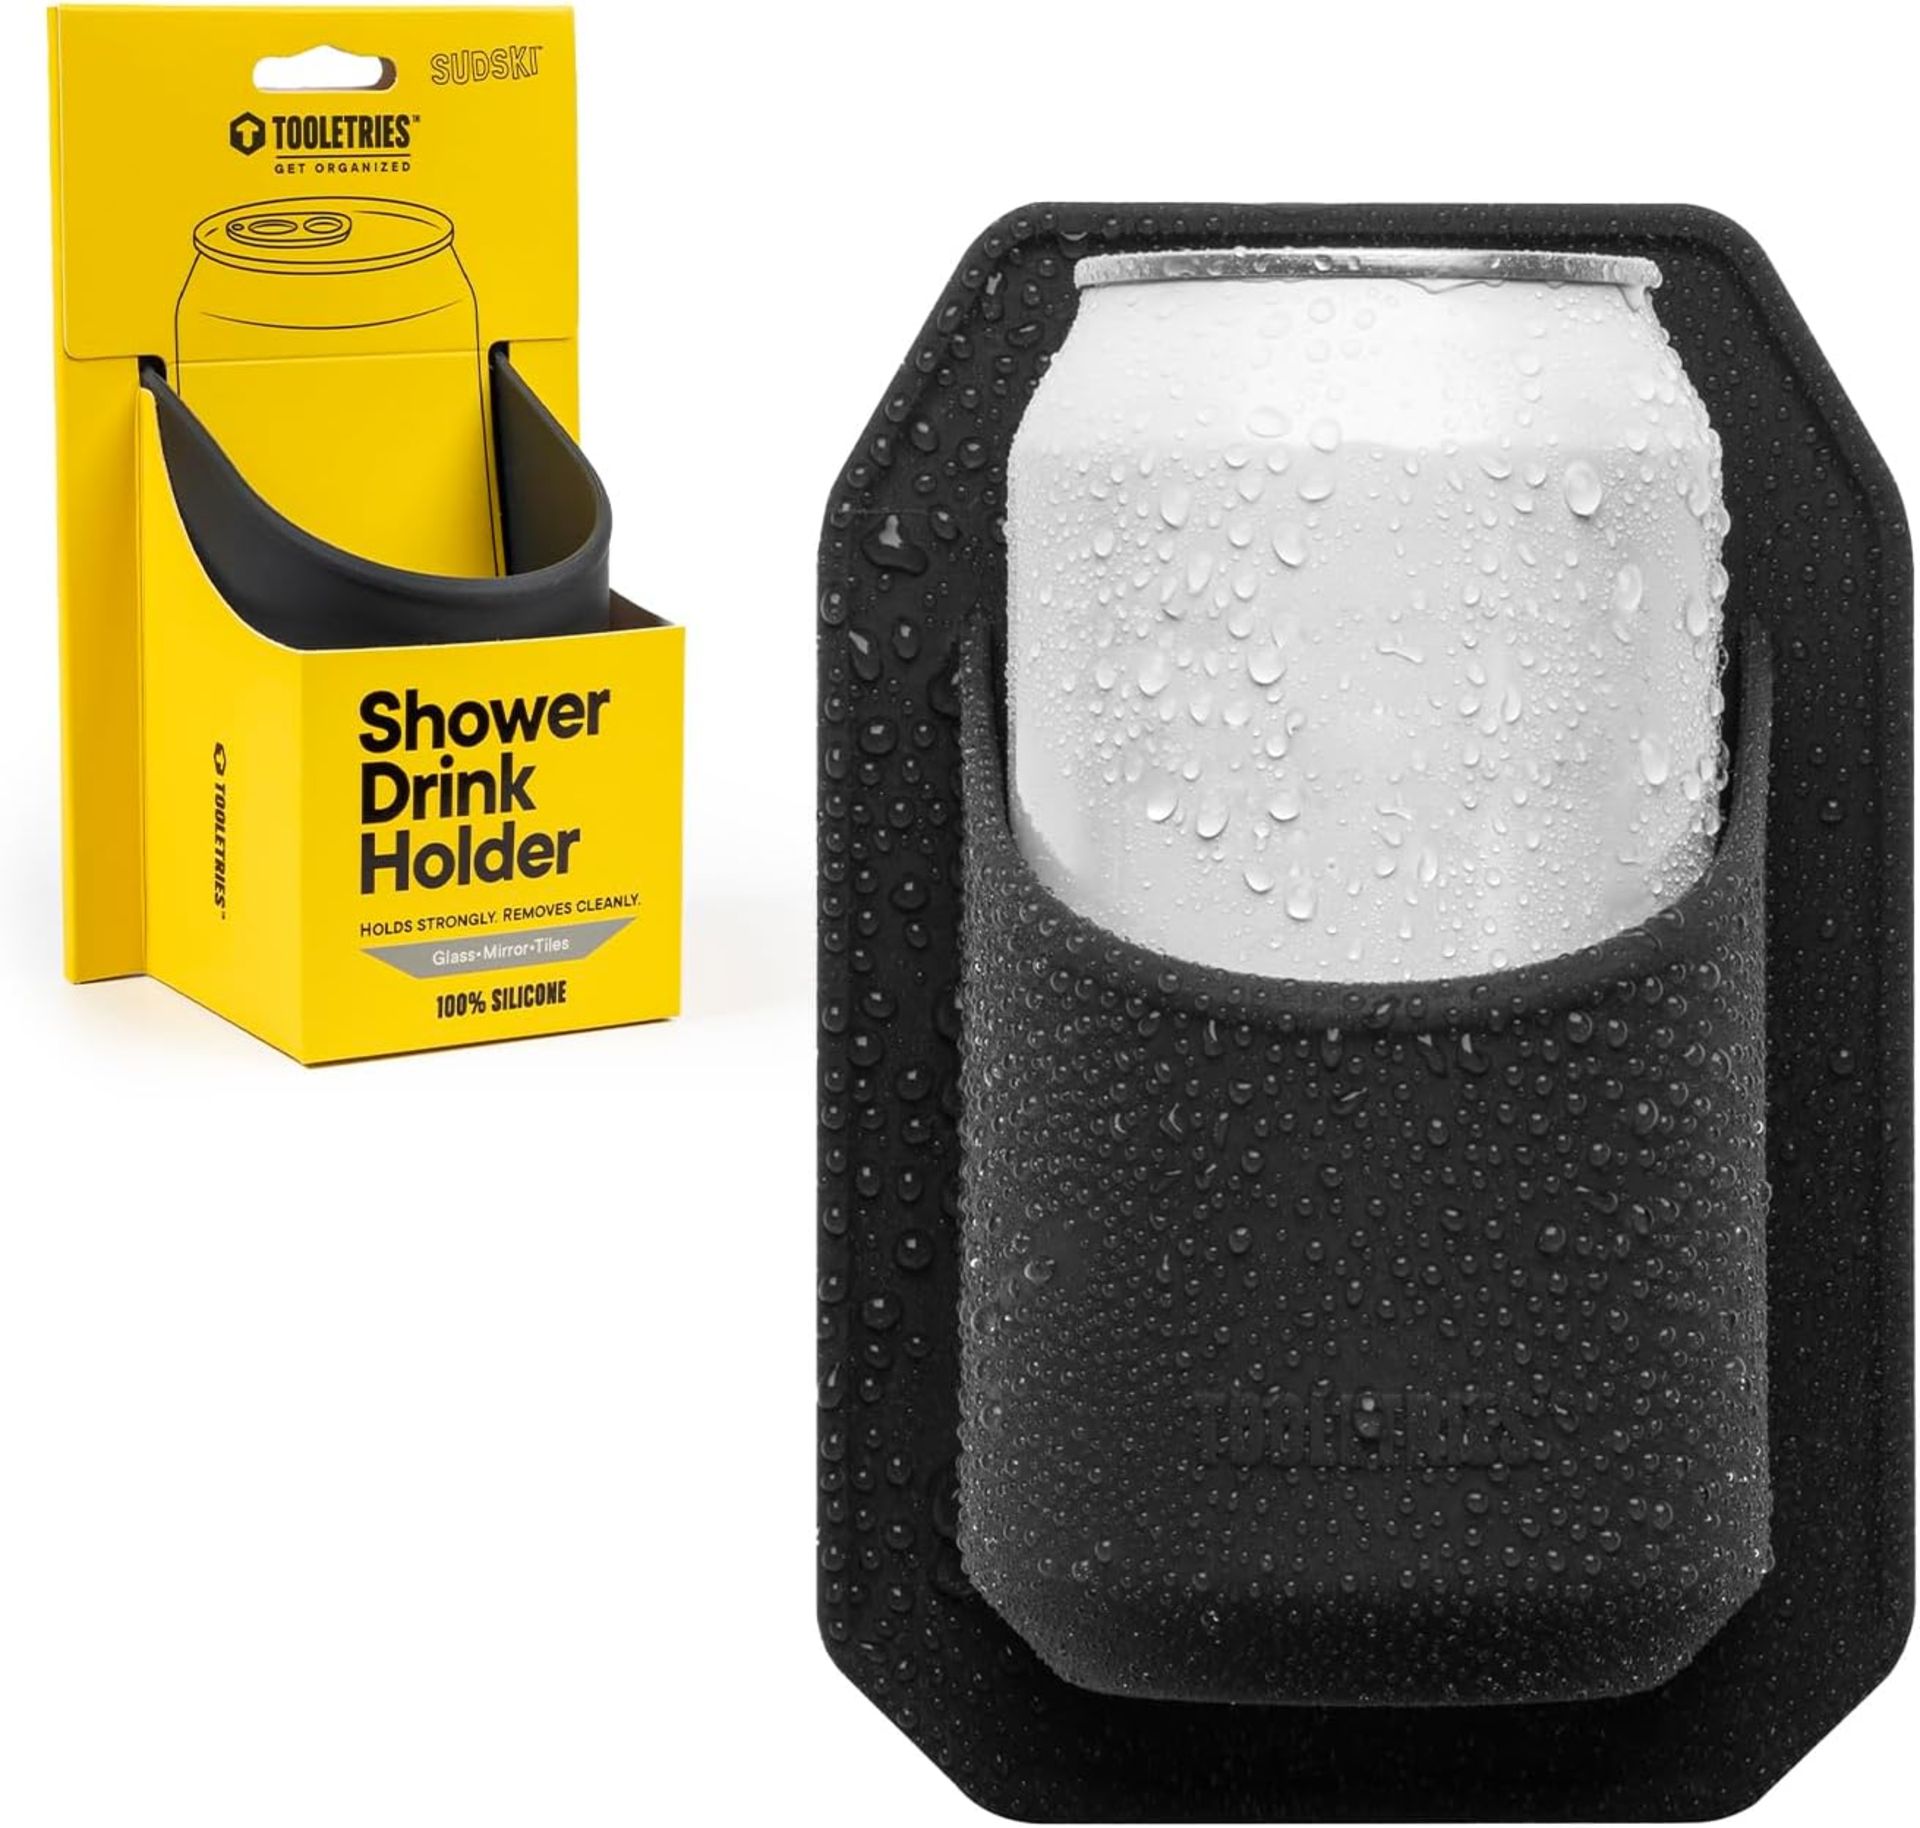 Tooletries Shower Seltzer/Drink Holder, Charcoal x22. Est Retail Value £230 - Image 4 of 4